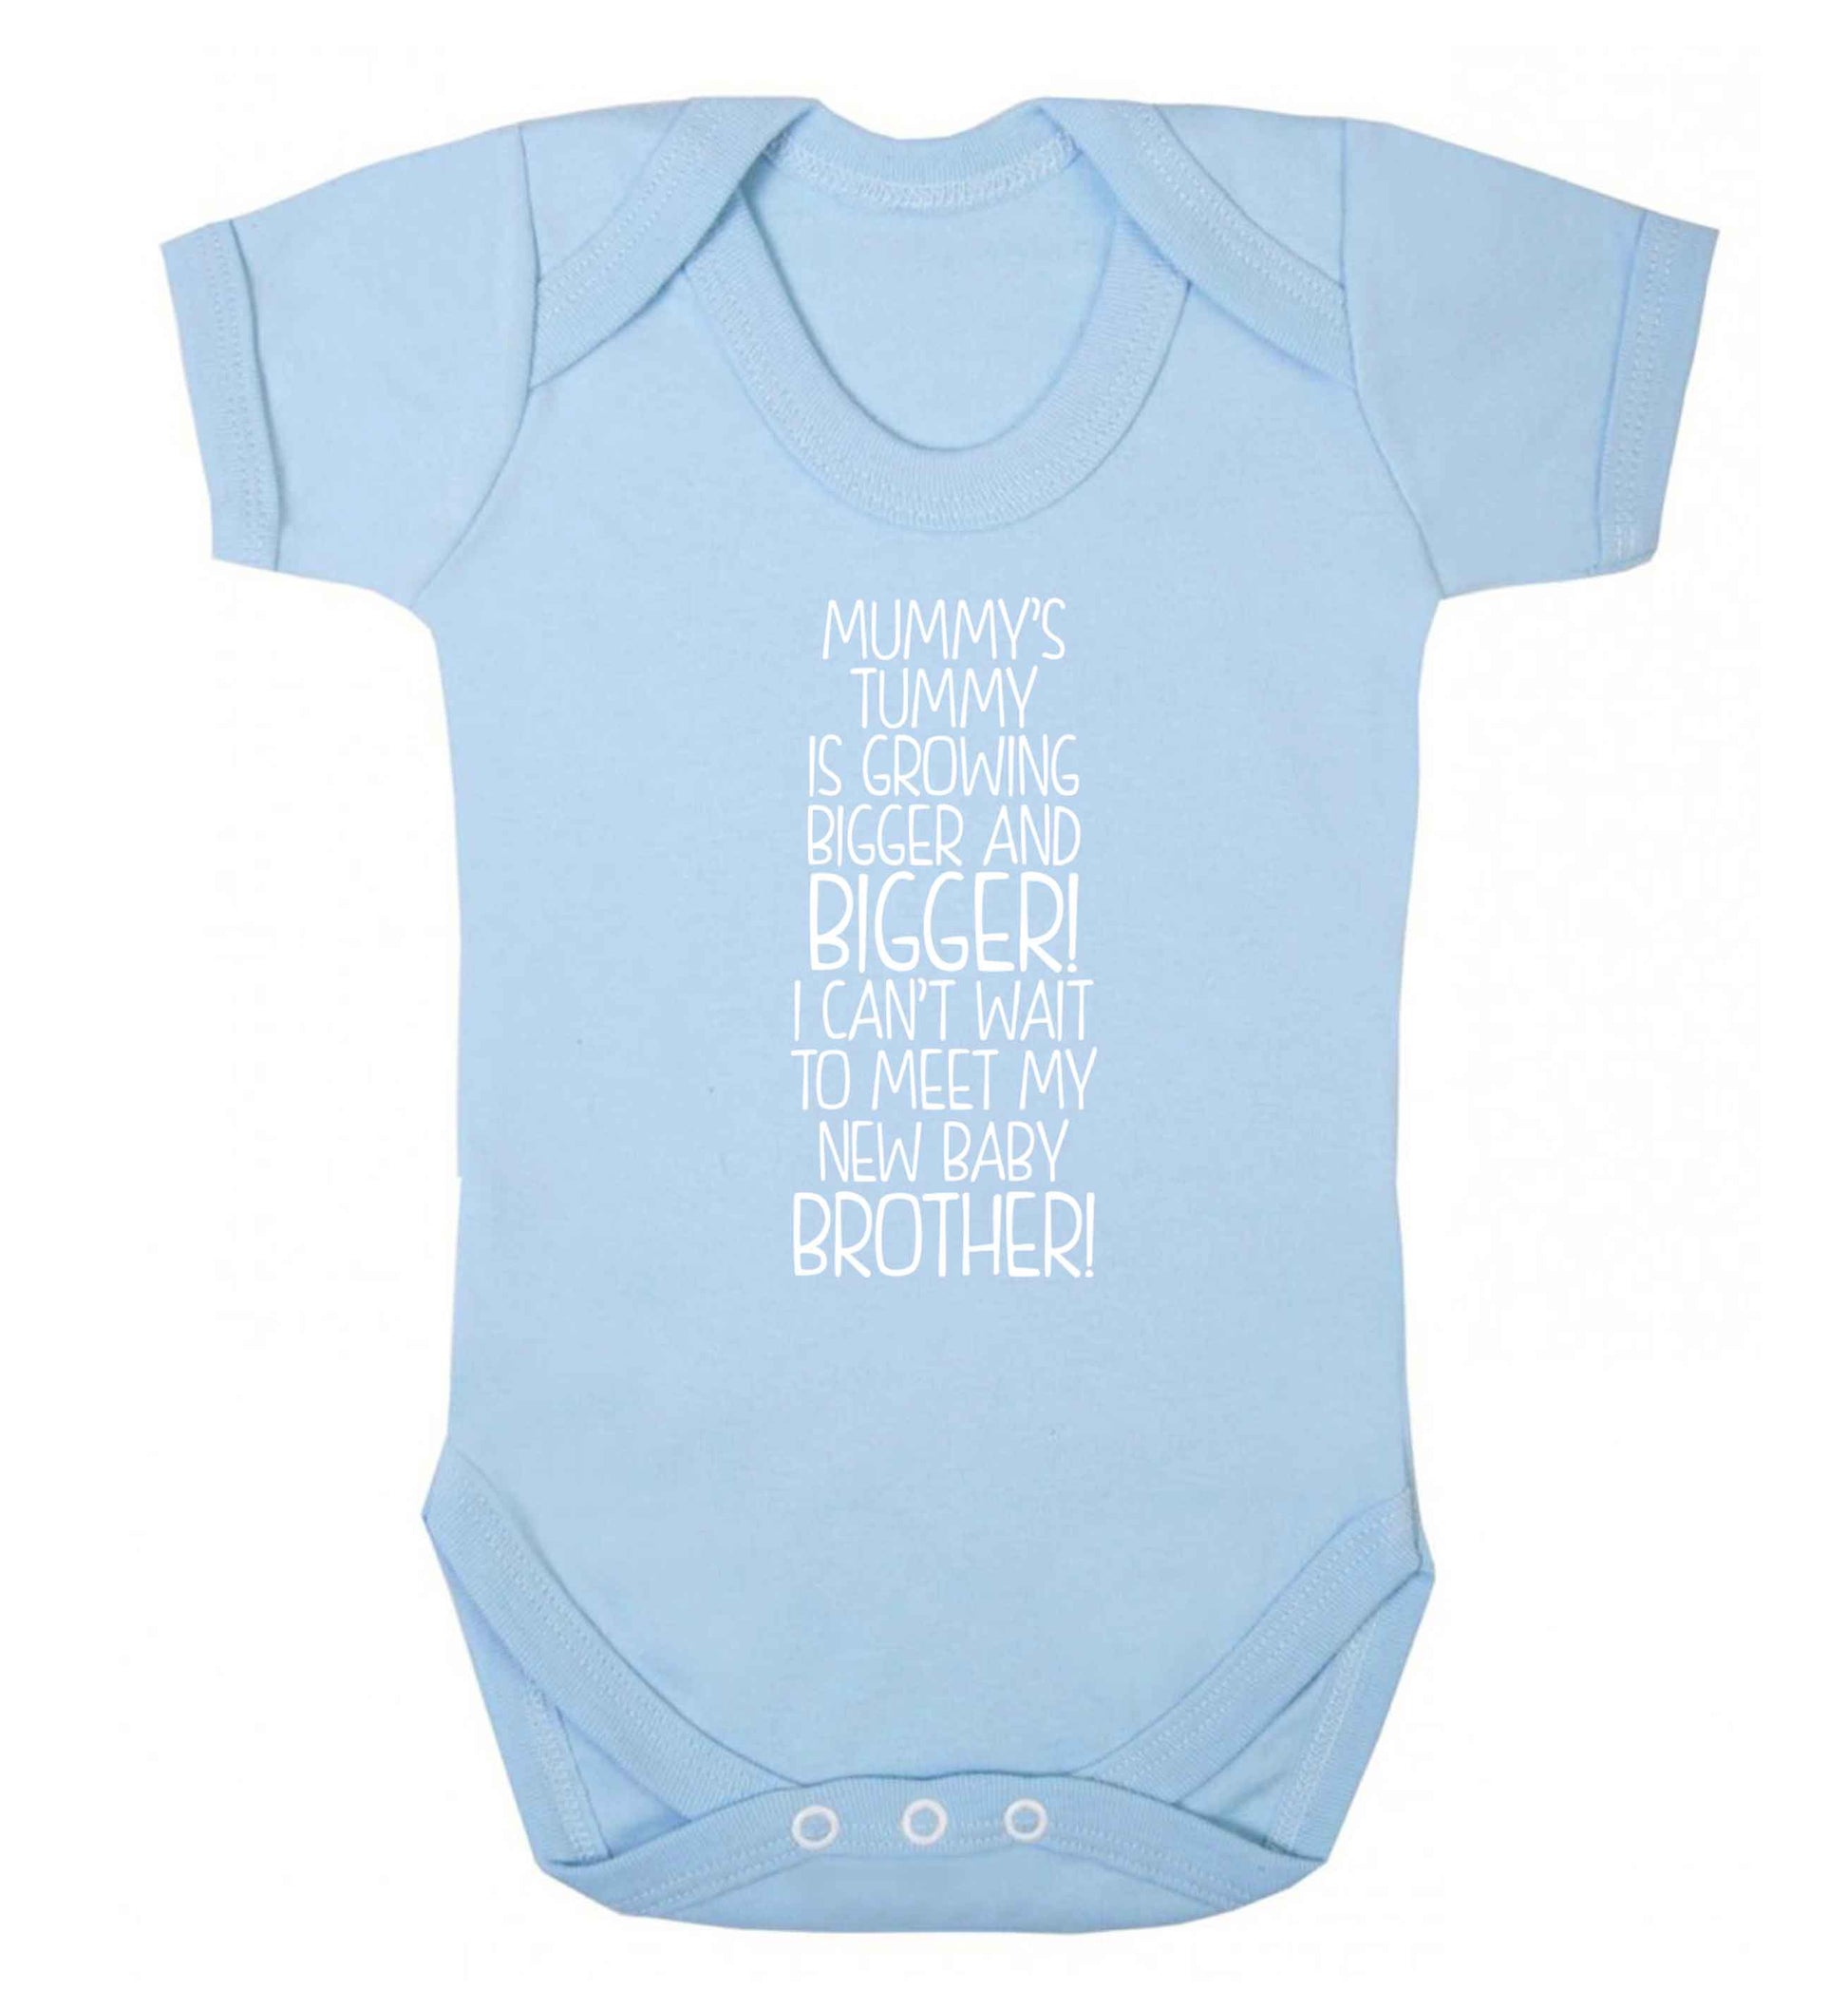 Mummy's tummy is growing bigger and bigger I can't wait to meet my new baby brother! Baby Vest pale blue 18-24 months